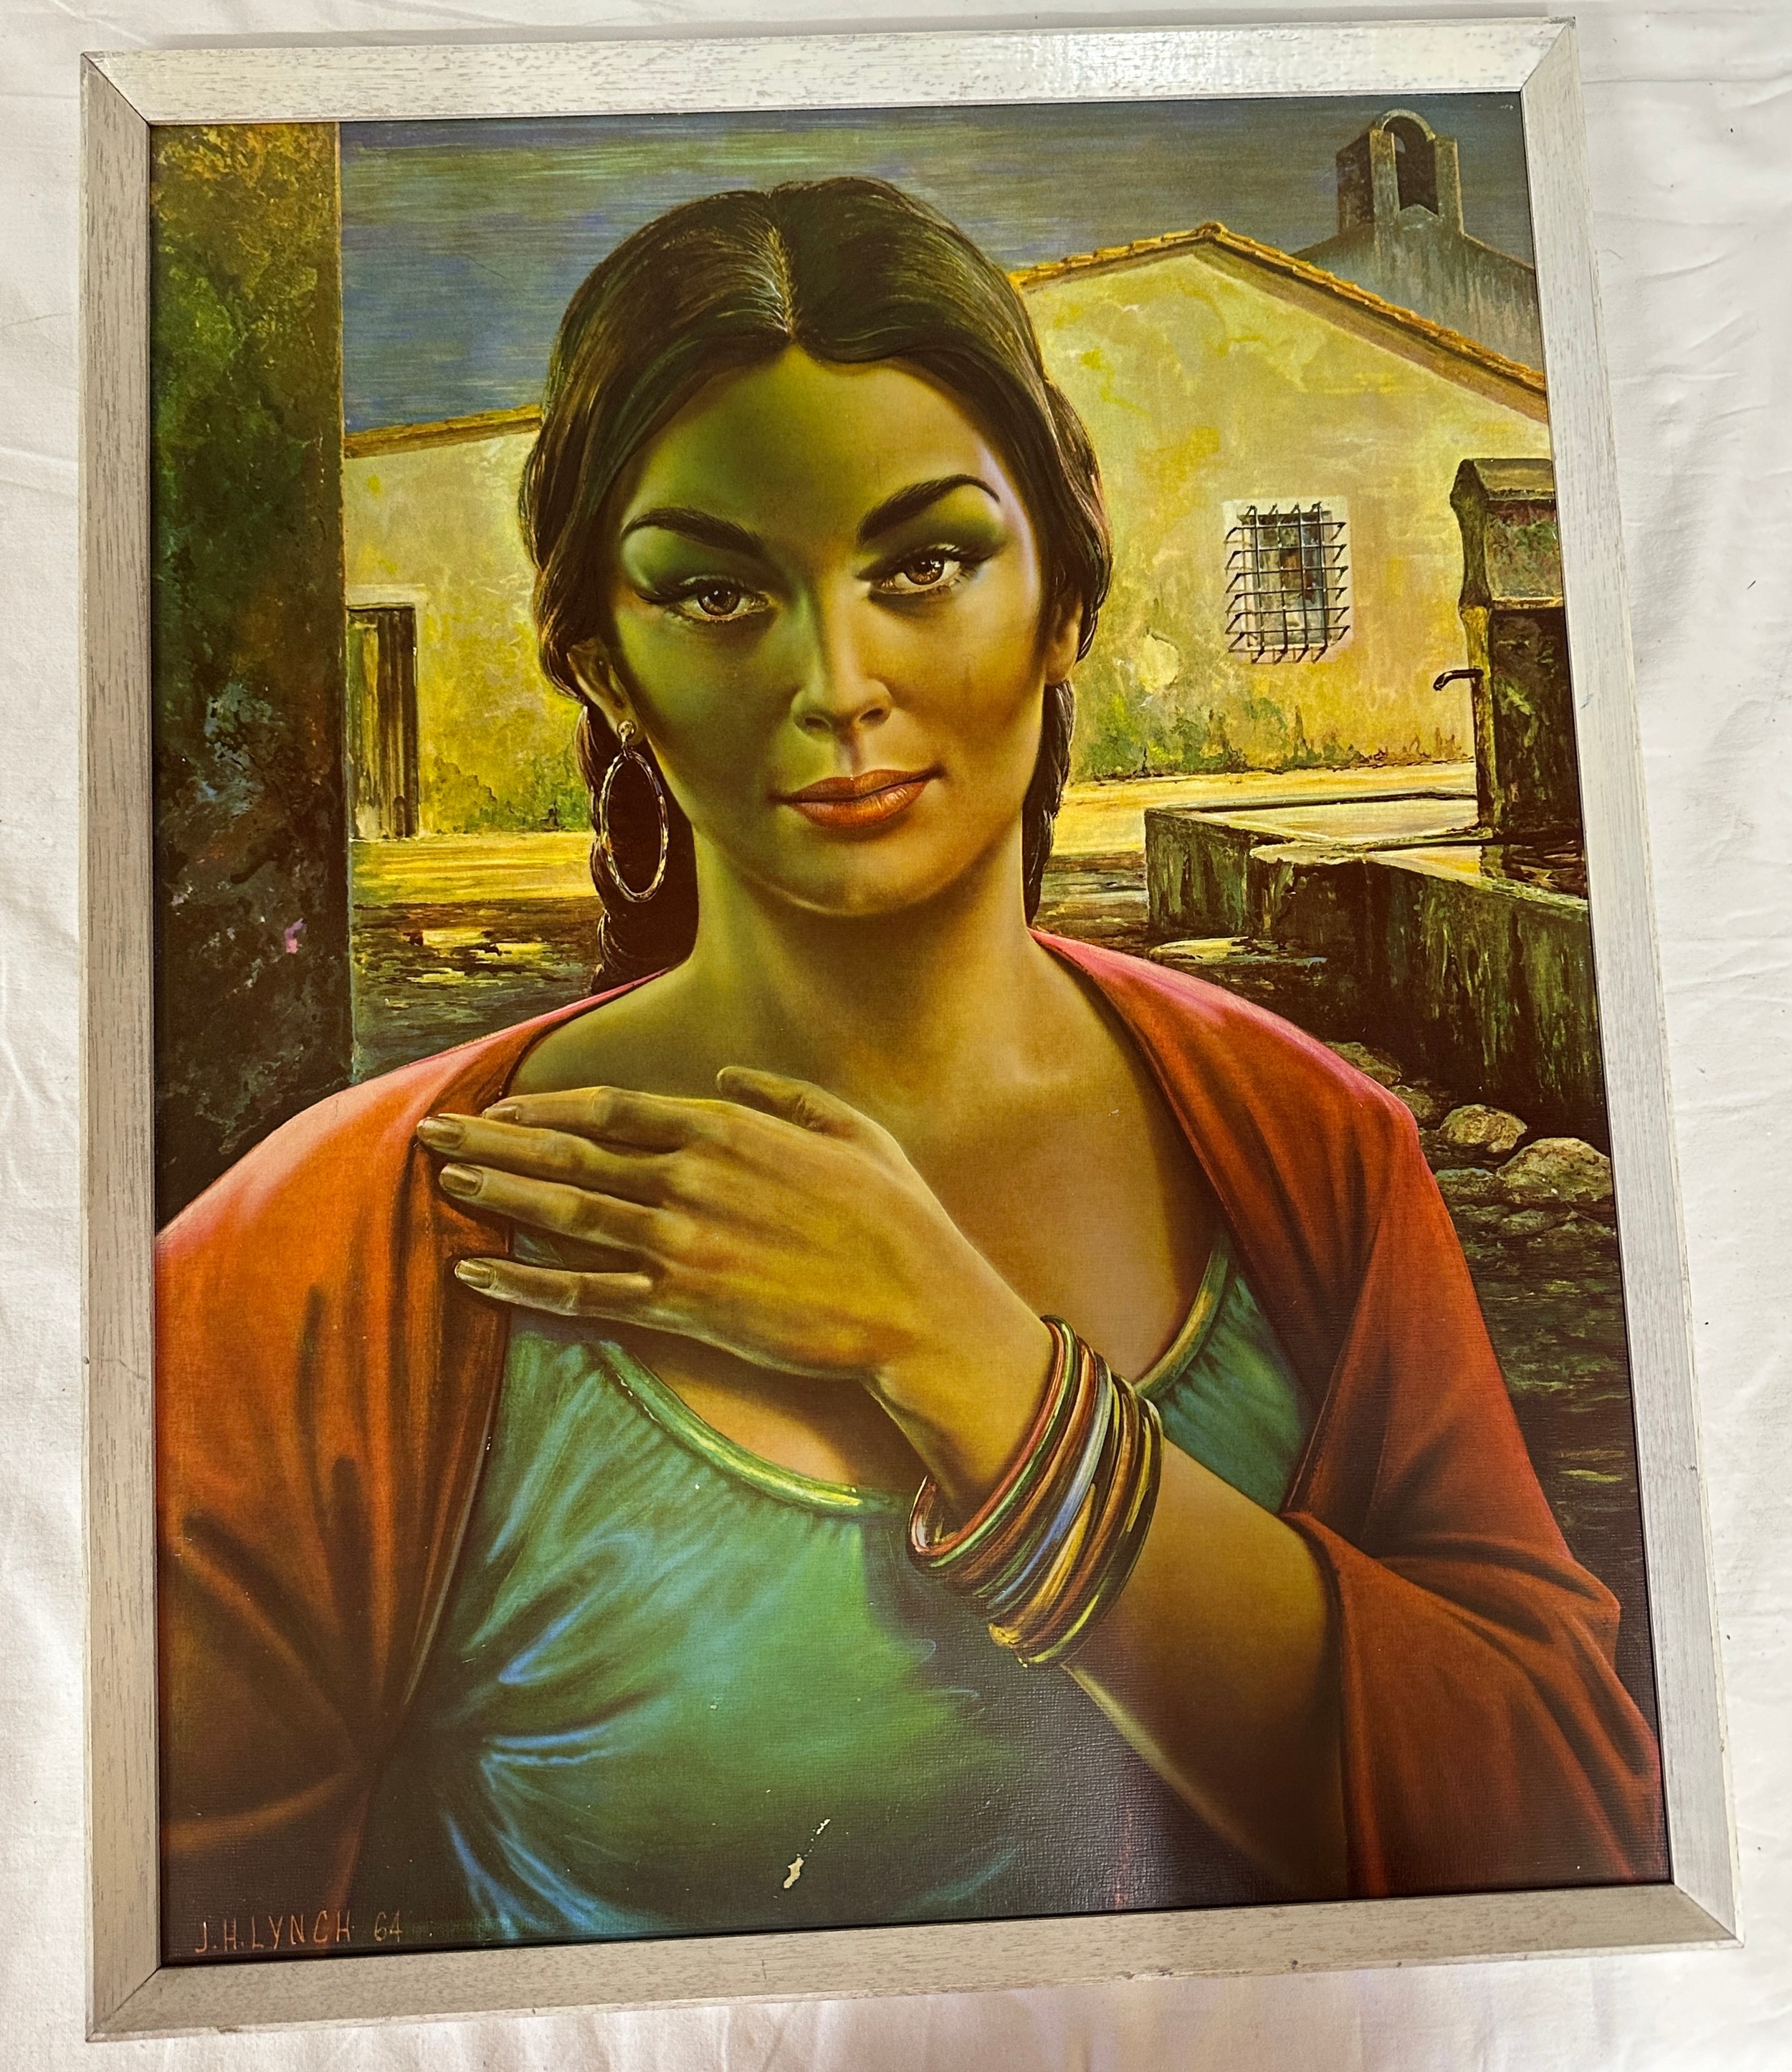 A vintage print of 'Lalinda' Spanish girl from J. H. Lynch's portrait 1964. Image size 57 x 44.5cm